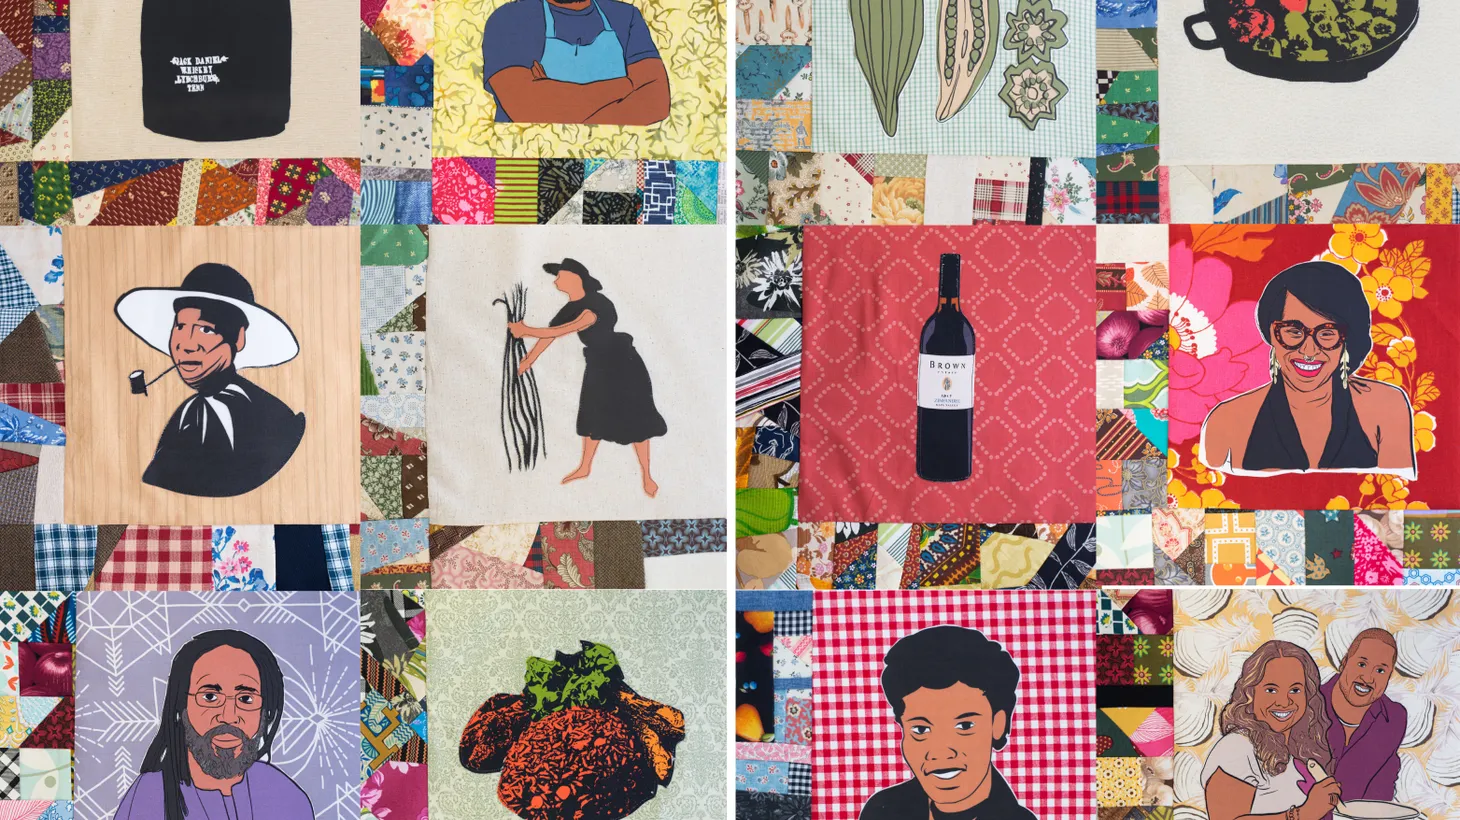 Dating from 1619 to the present, The Legacy Quilt honors African American icons, inventors, and figures of agriculture and commerce who have made an impact on food and cuisine. The 406 blocks were sewn together by Harlem Needle Arts.